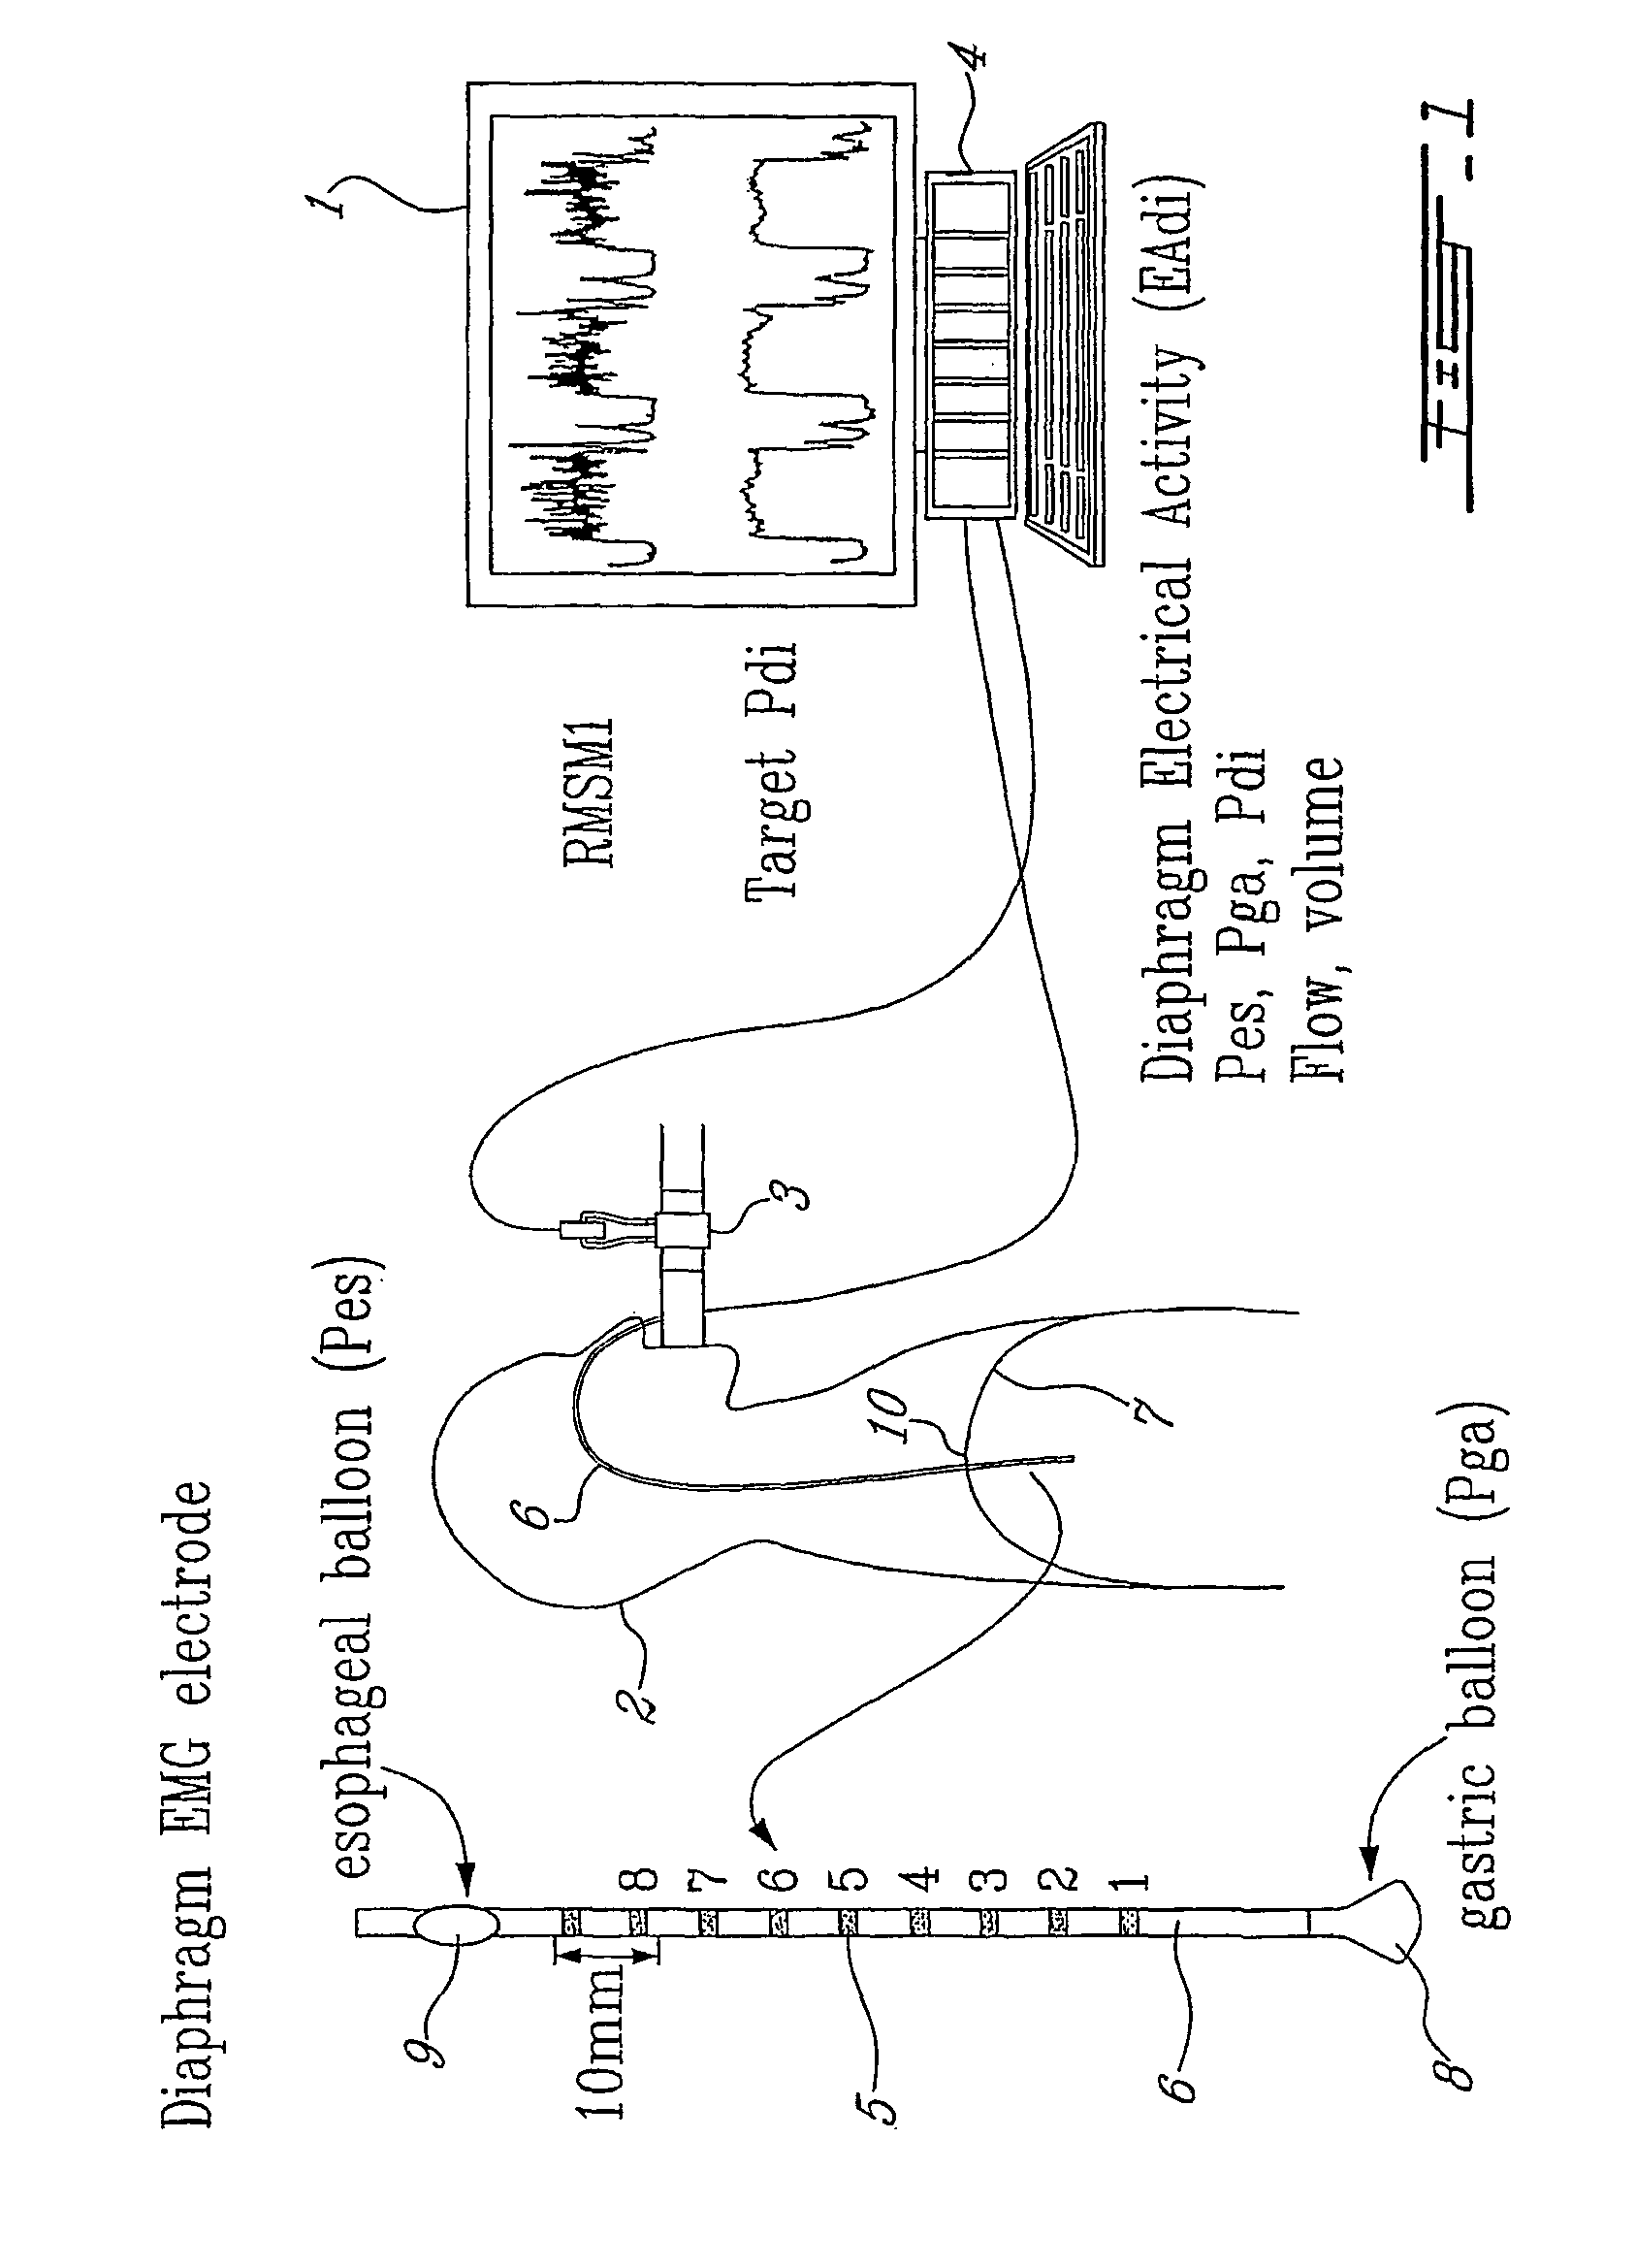 Method and device using myoelectrical activity for optimizing a patient's ventilatory assist